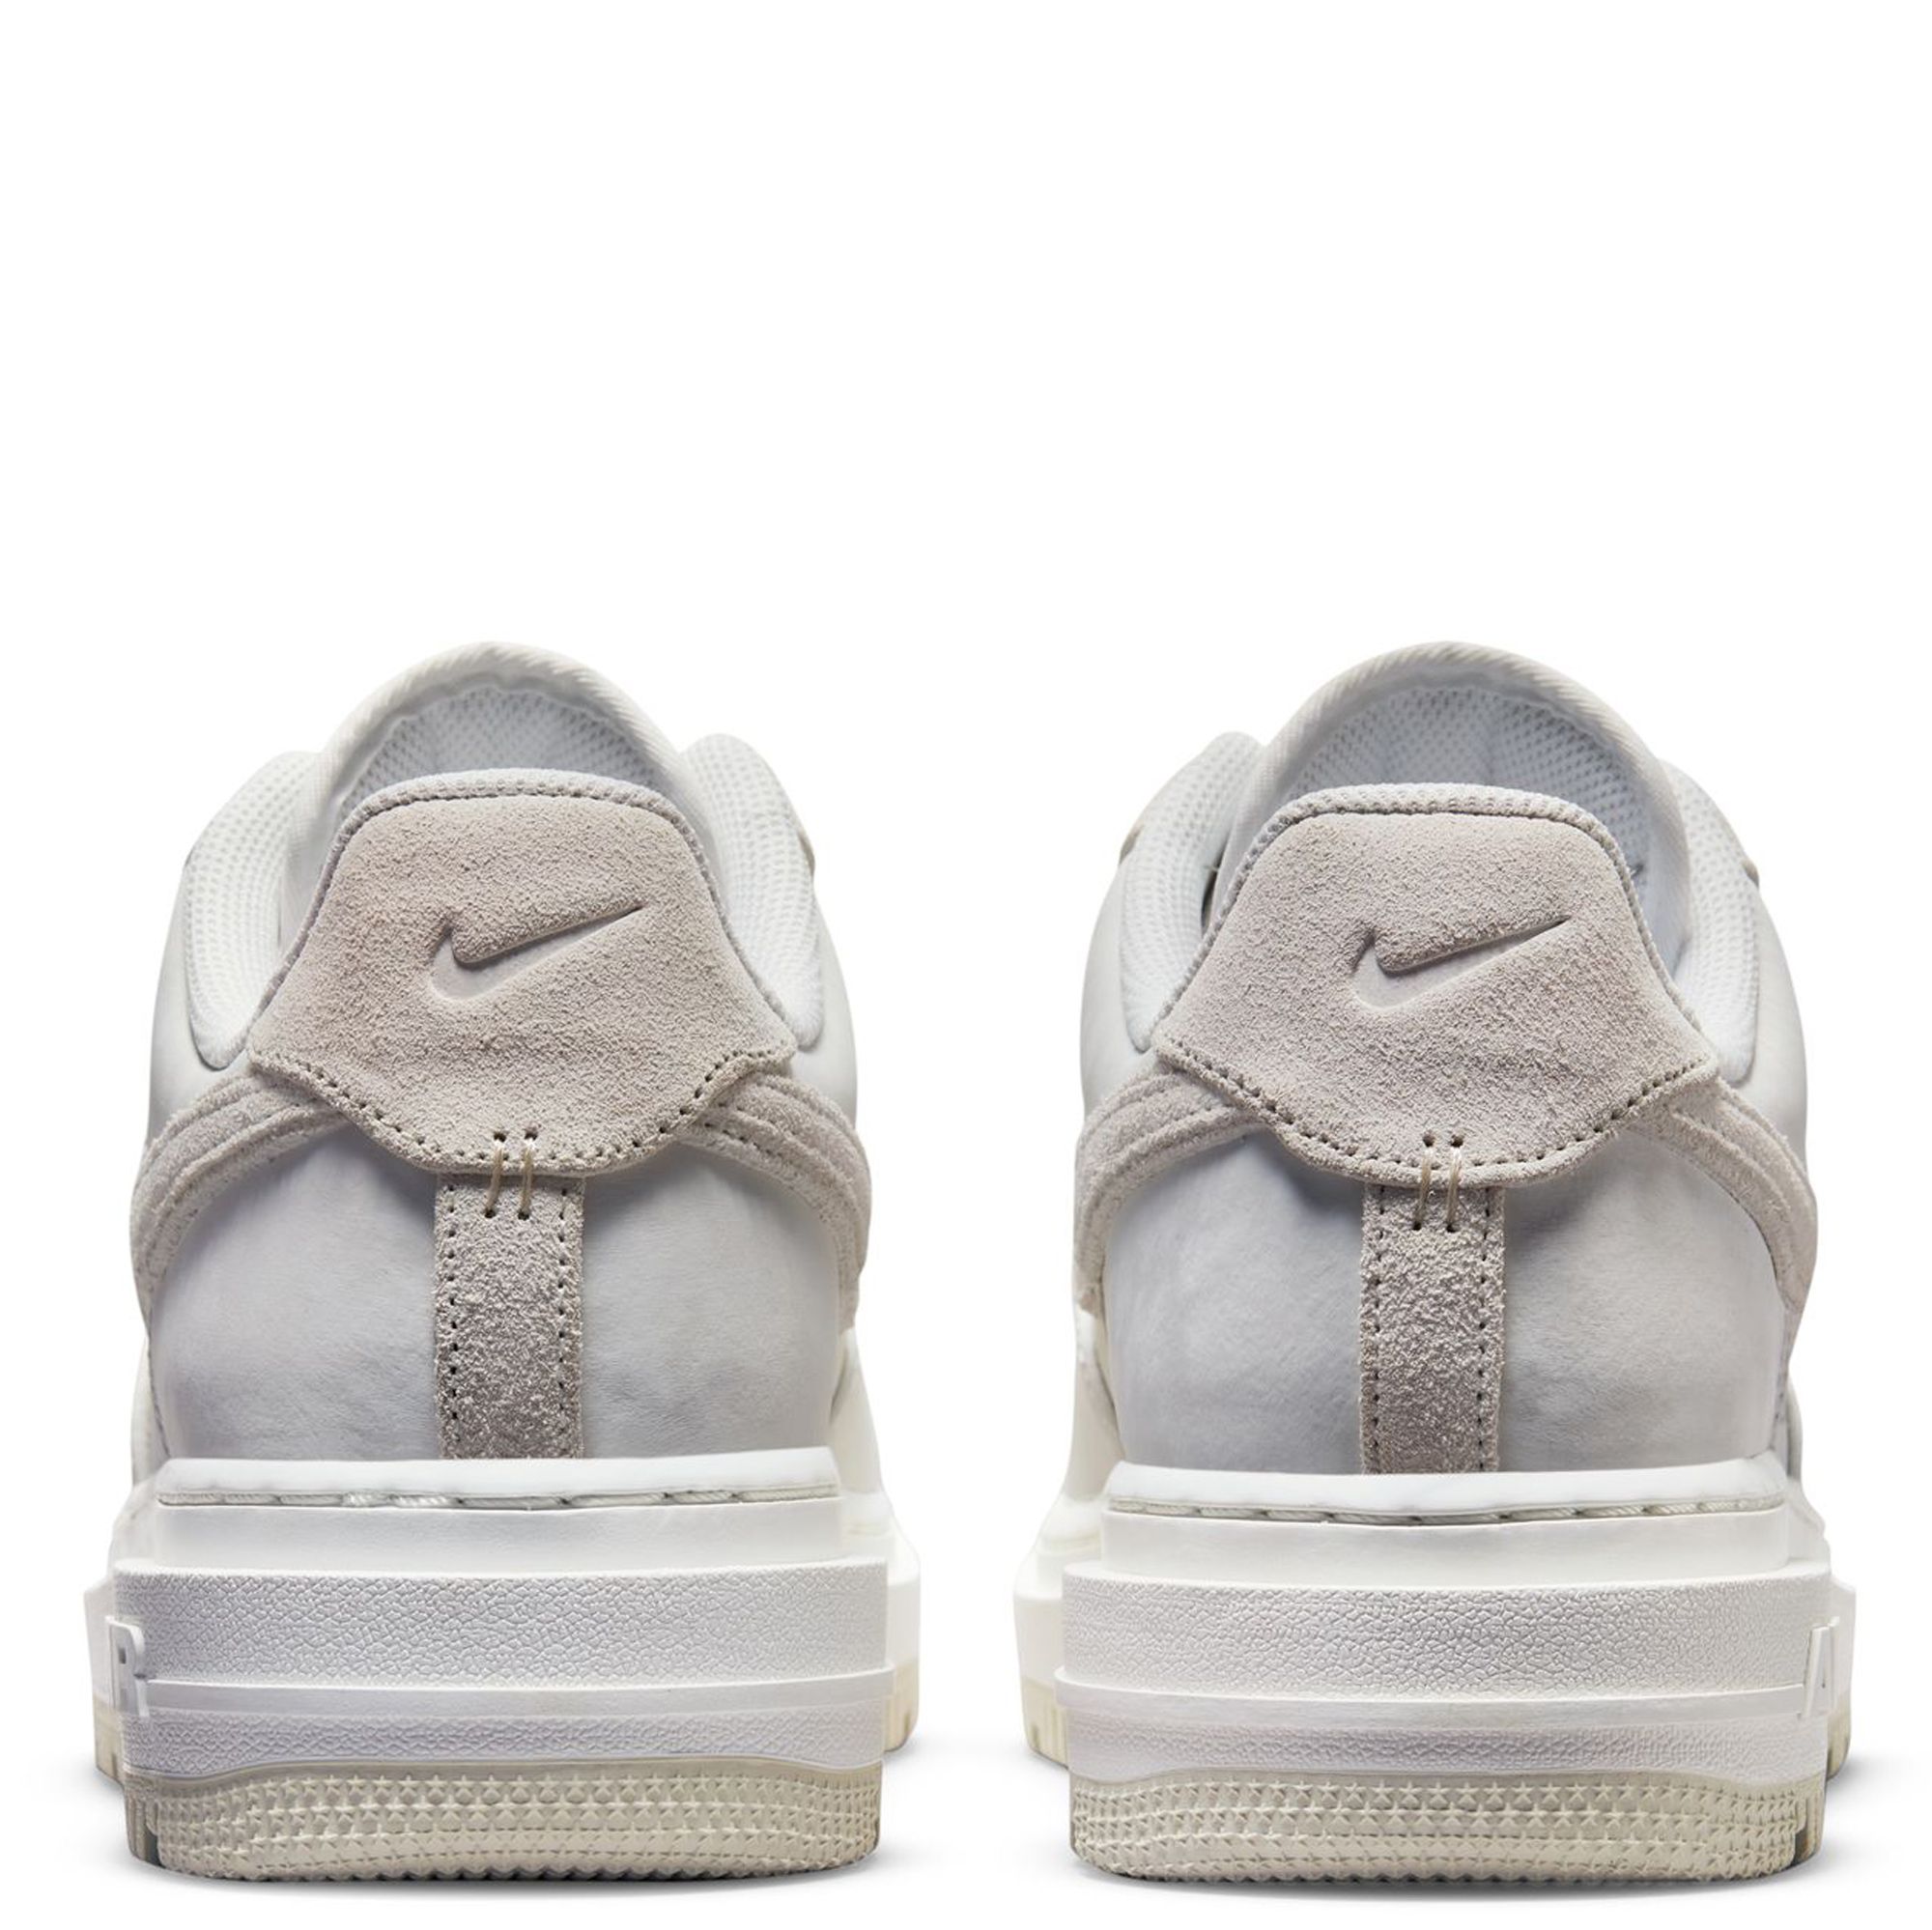 Nike Air Force 1 Luxe Triple White Sneakers